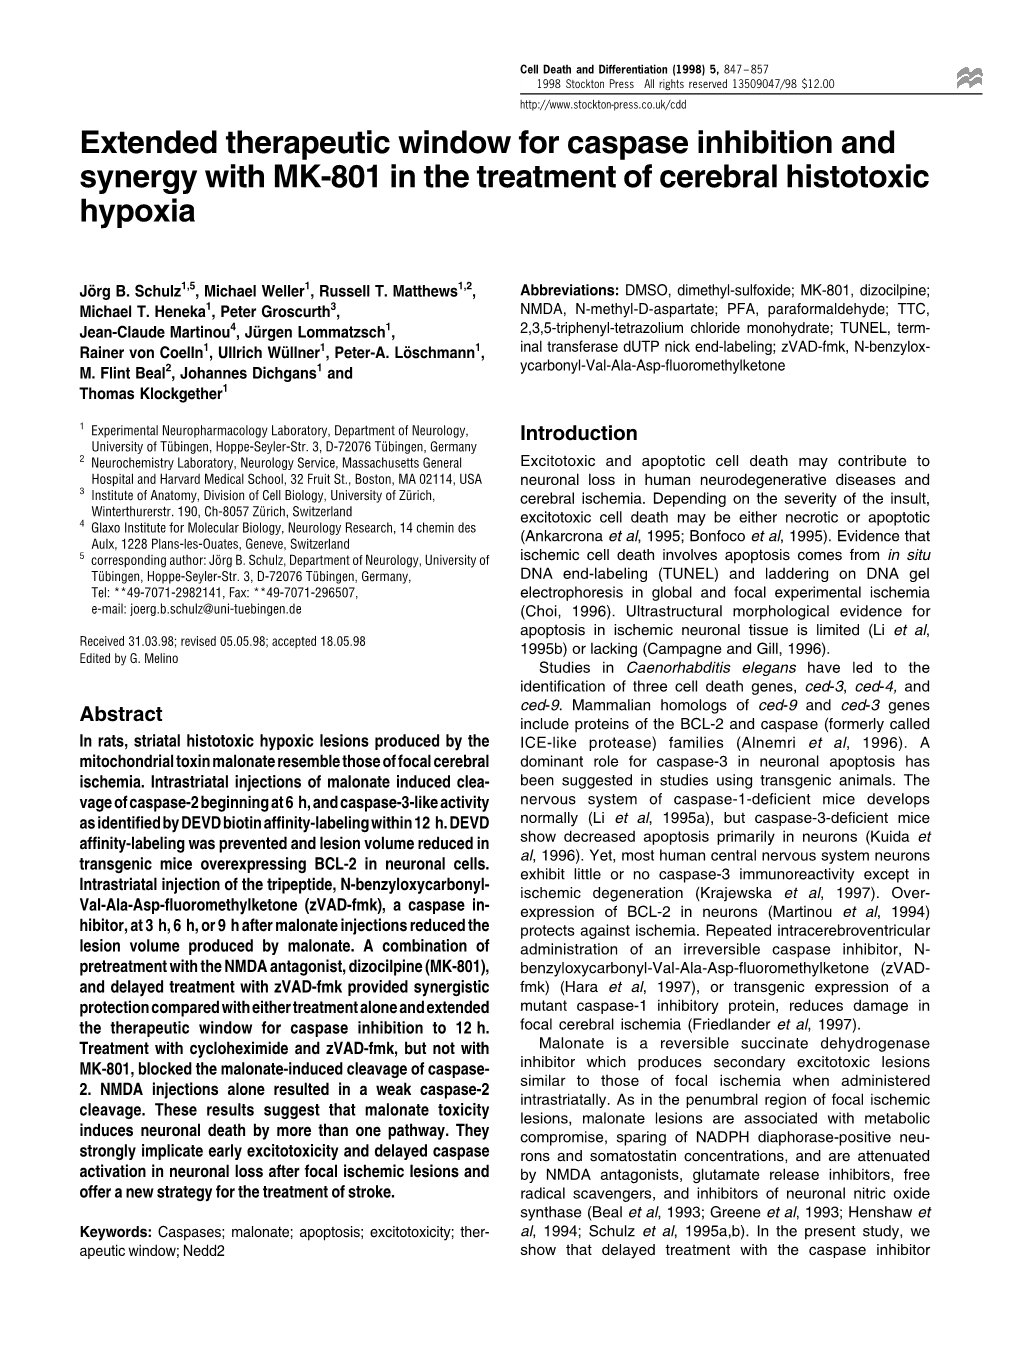 Extended Therapeutic Window for Caspase Inhibition and Synergy with MK-801 in the Treatment of Cerebral Histotoxic Hypoxia